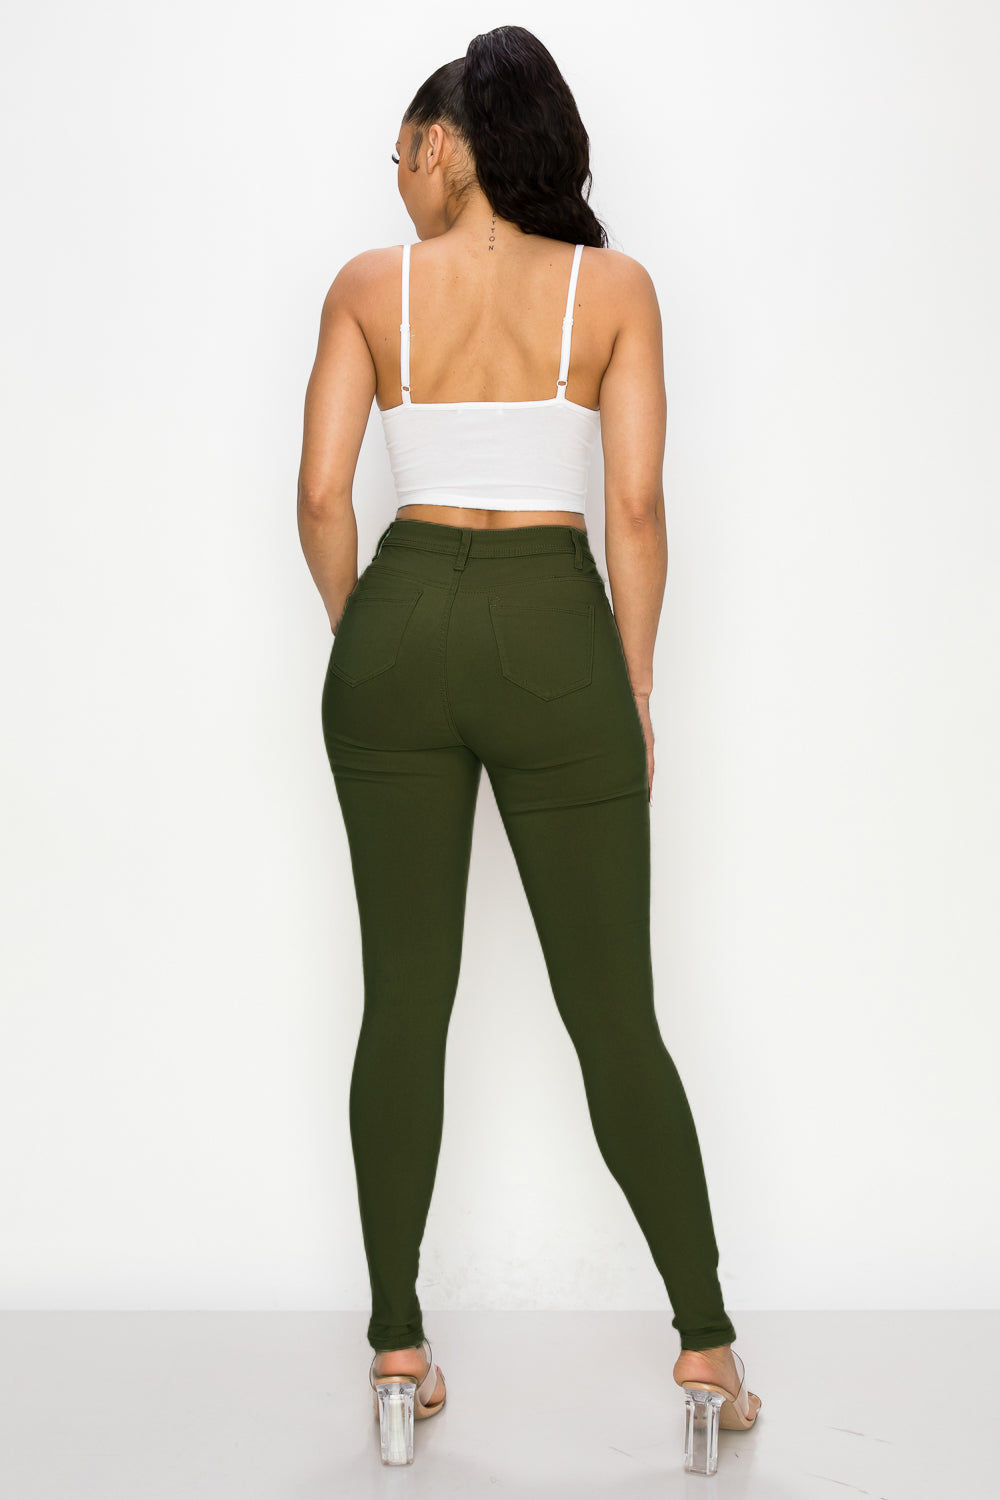 - OLIVE JEANS COLORED LOVER HIGH WAISTED FASHION SUPER-STRETCH BRAND